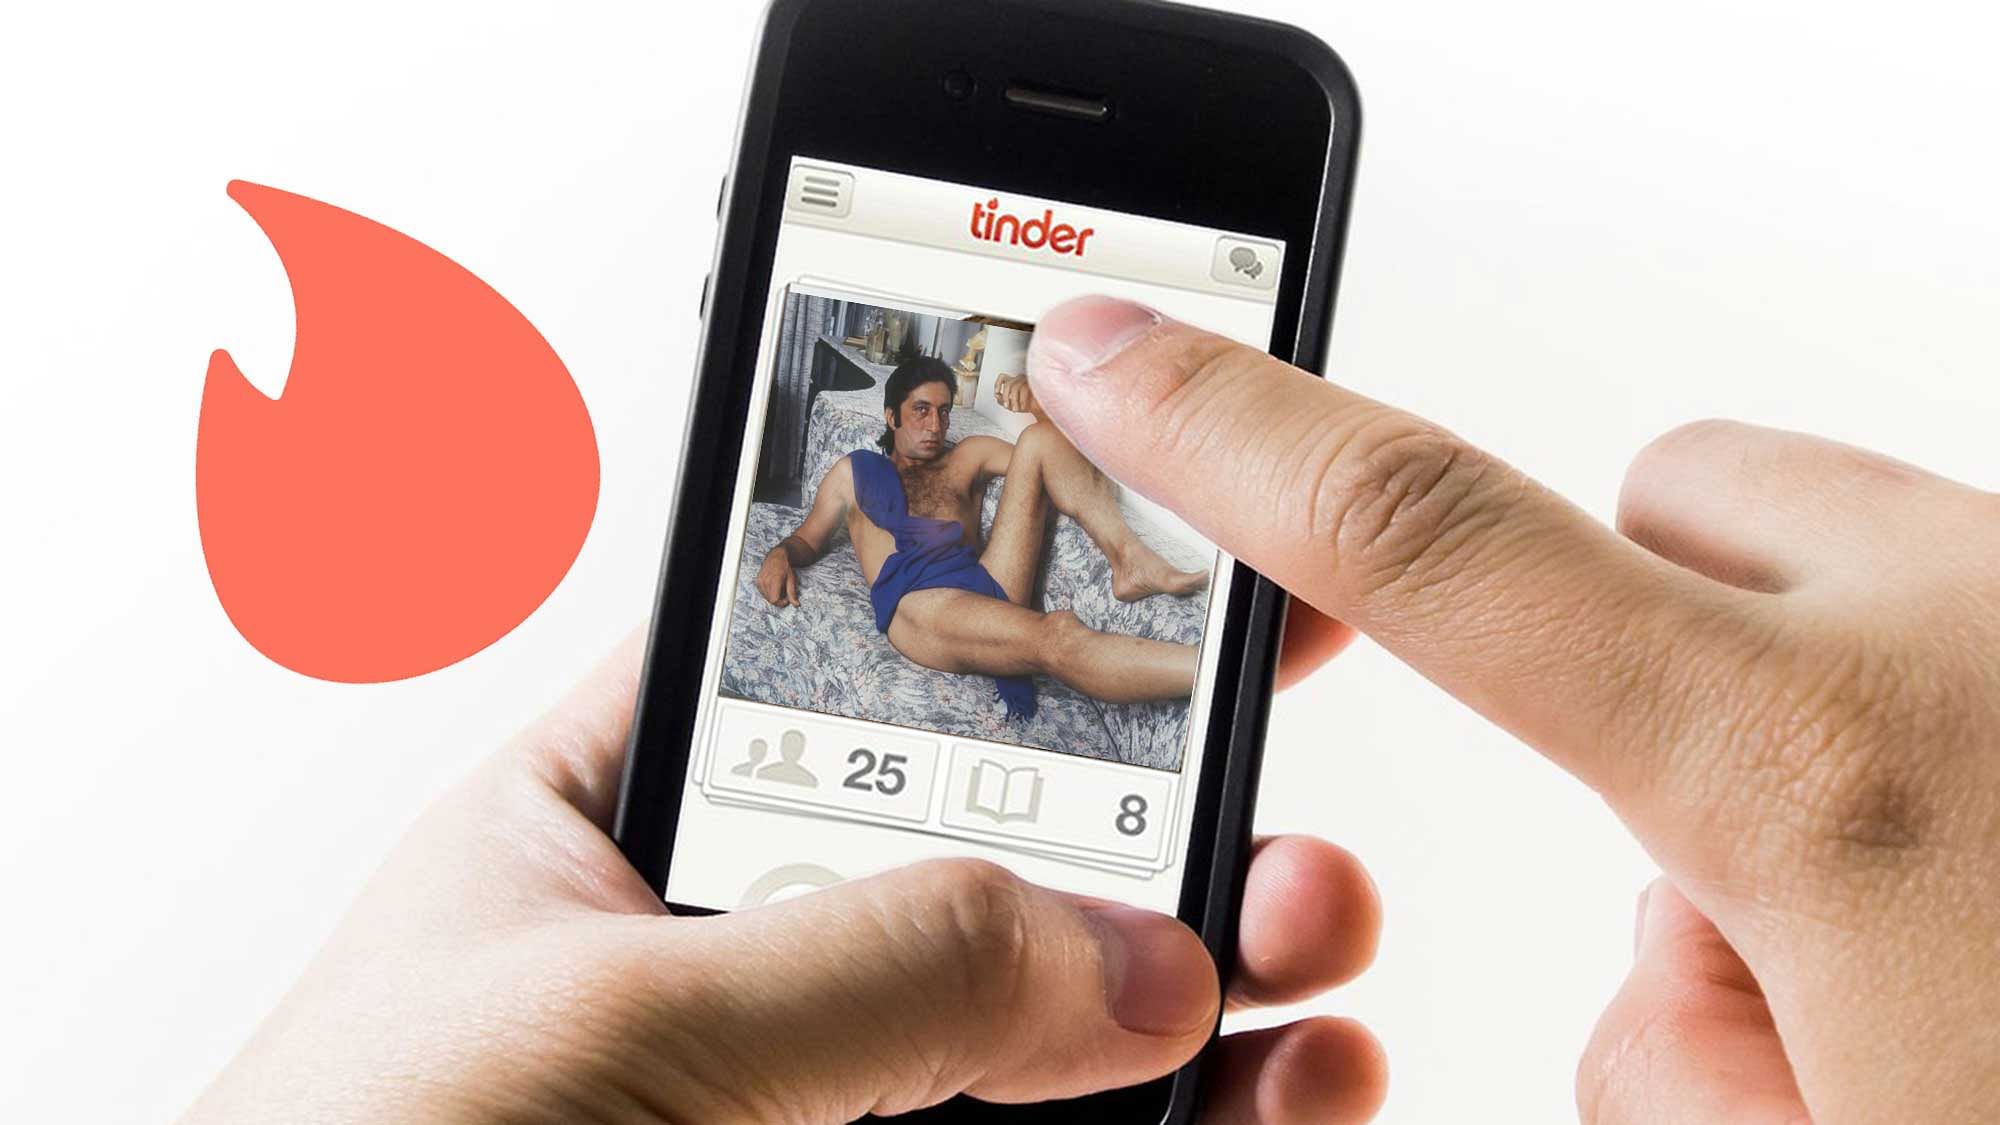 Indians on Tinder are often bordering on sleazy. (Photo: <b>The Quint</b>)